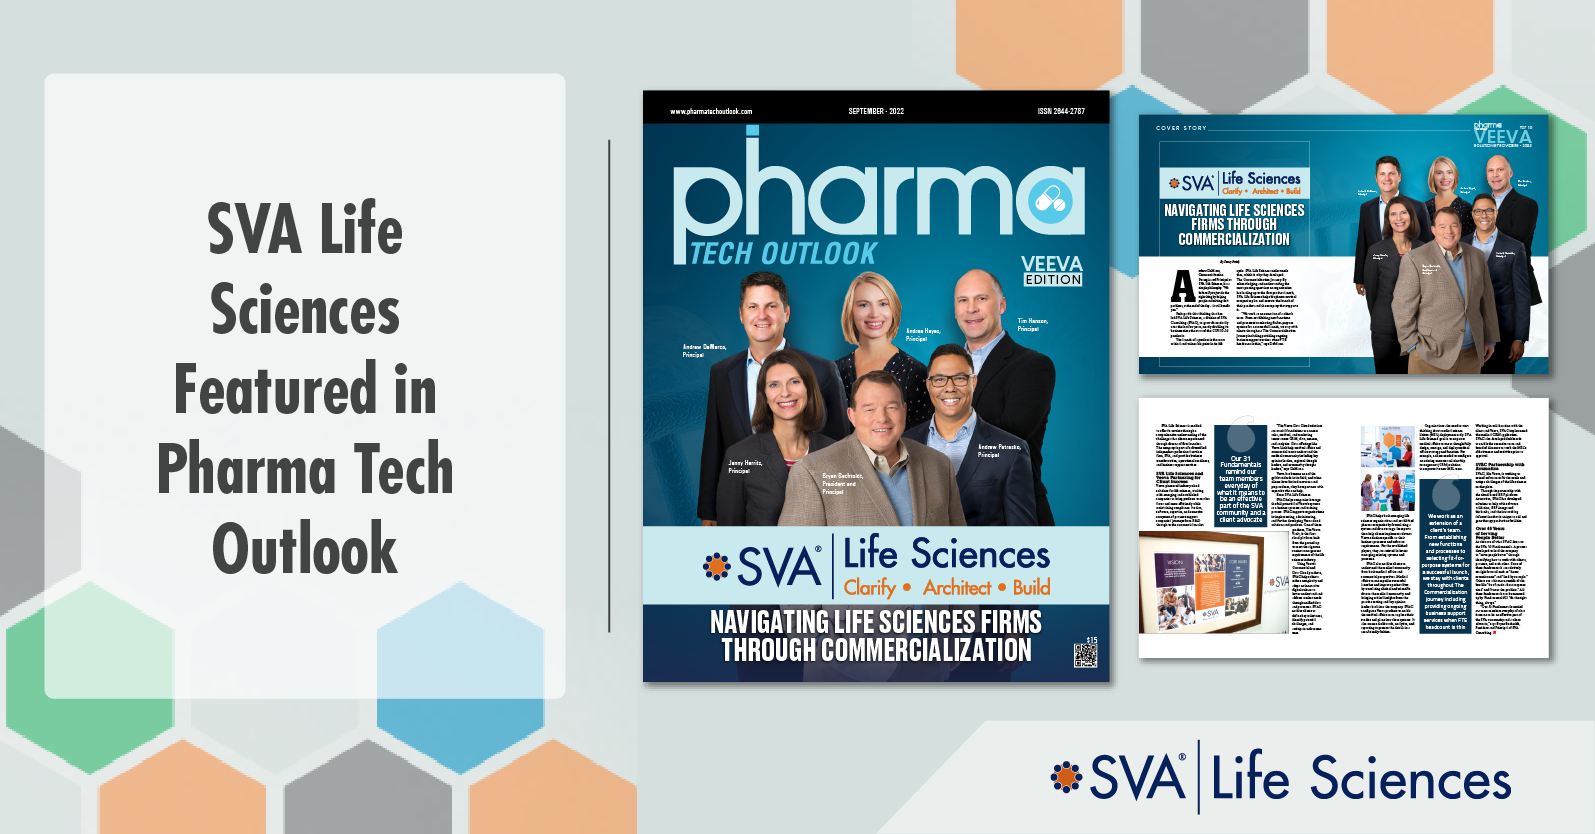 SVA Life Sciences Featured in Pharma Tech Outlook